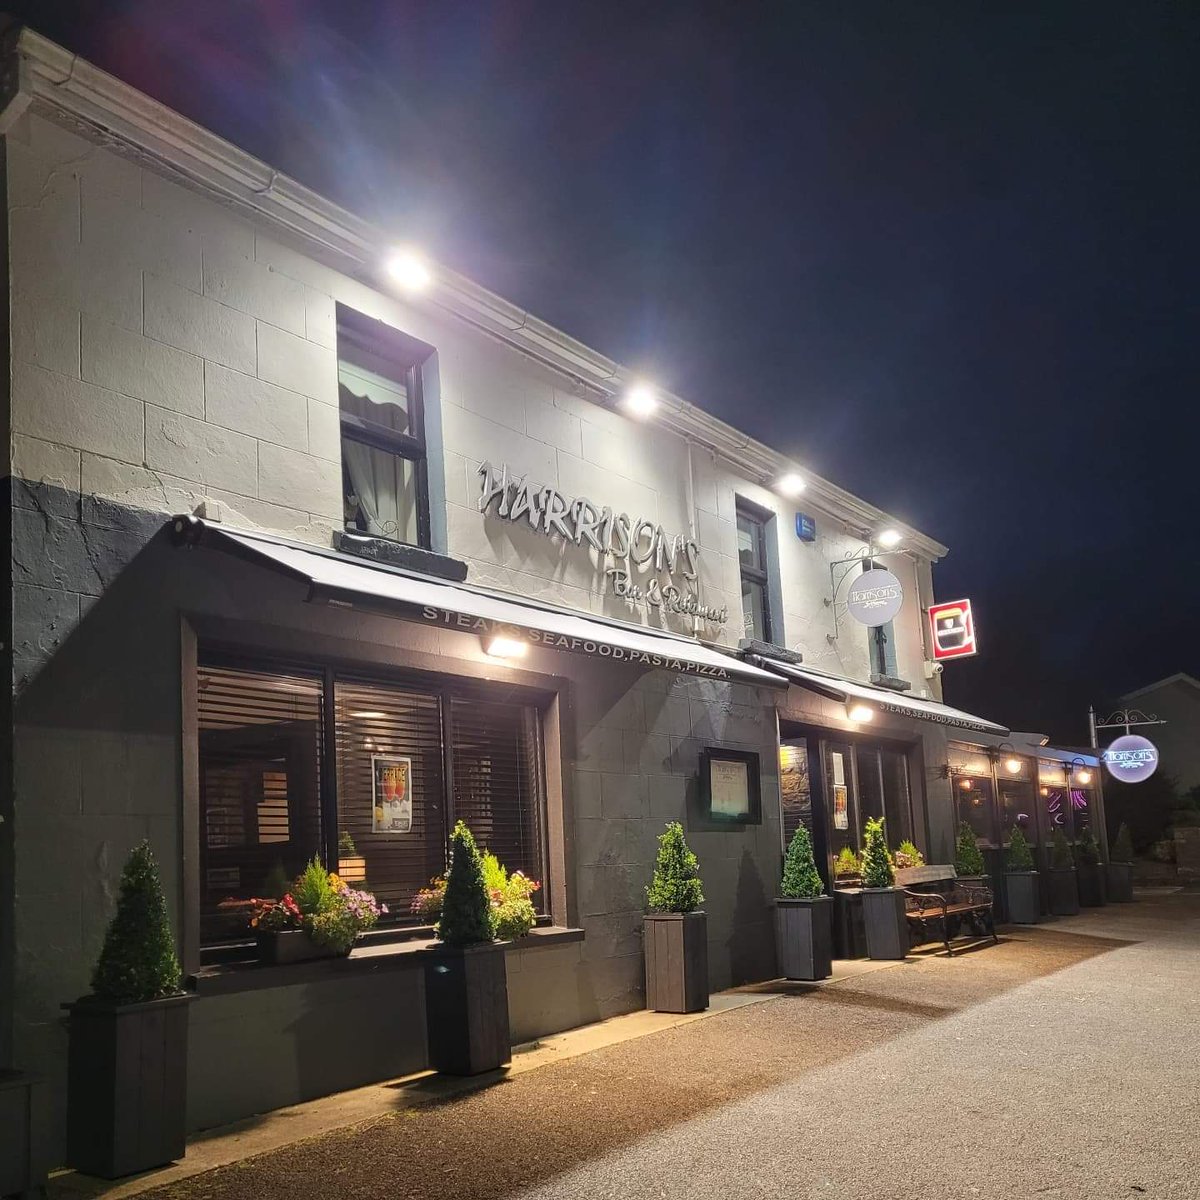 🌻☀️The Summers end, ain't so bad 😌 with these beautiful nights 💕😍 @harrisonscliffoney

⚡💜 Reservations at food@harrisons.ie or Call 0719166123 💜⚡

#sligobar #sligorestaurant #seafoodsligo